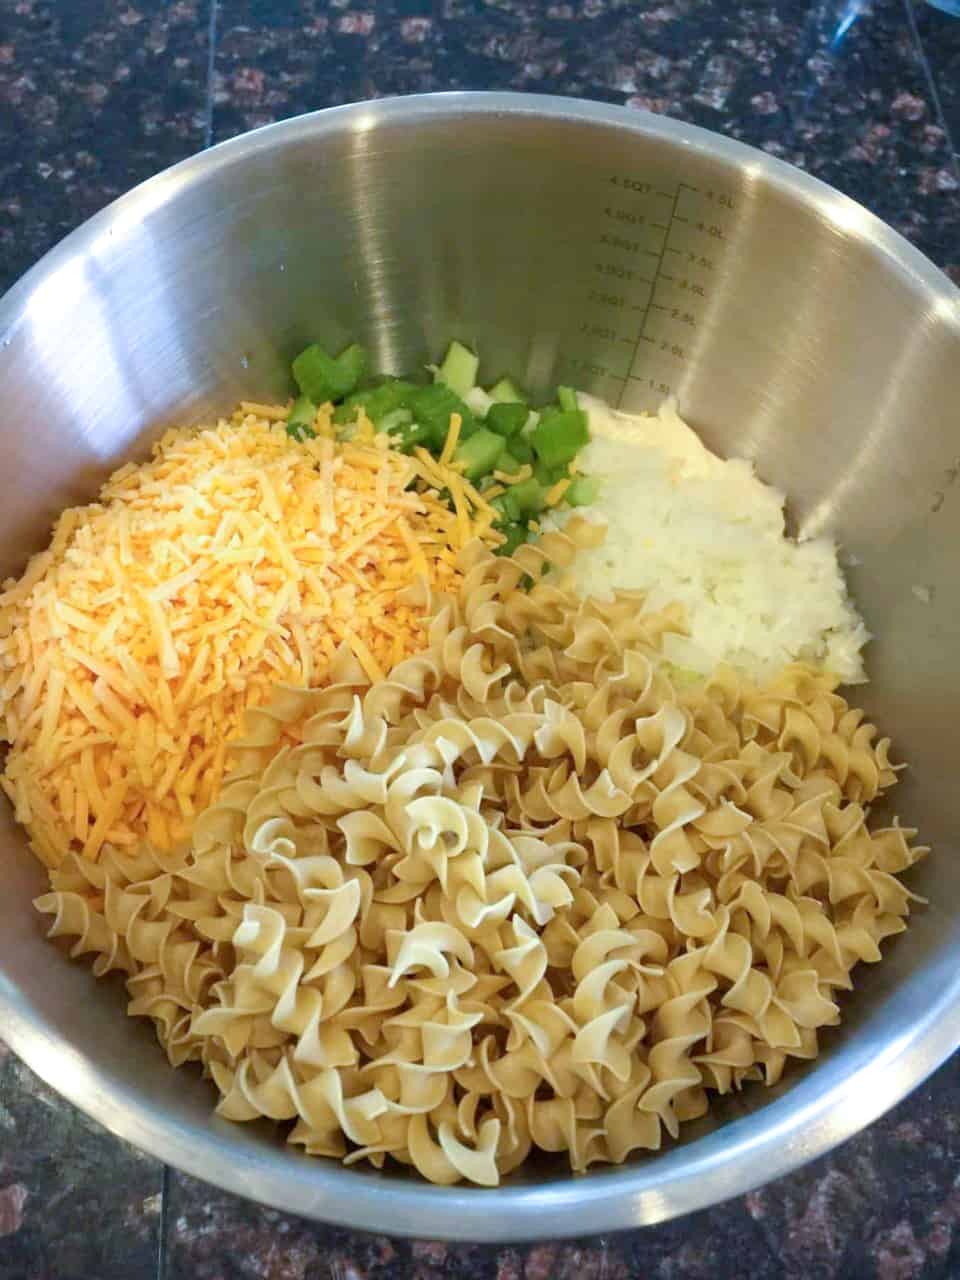 Ingredients for Turkey Noodle Casserole in a bowl. Pictured - egg noodles, shredded cheese, onion and celery.